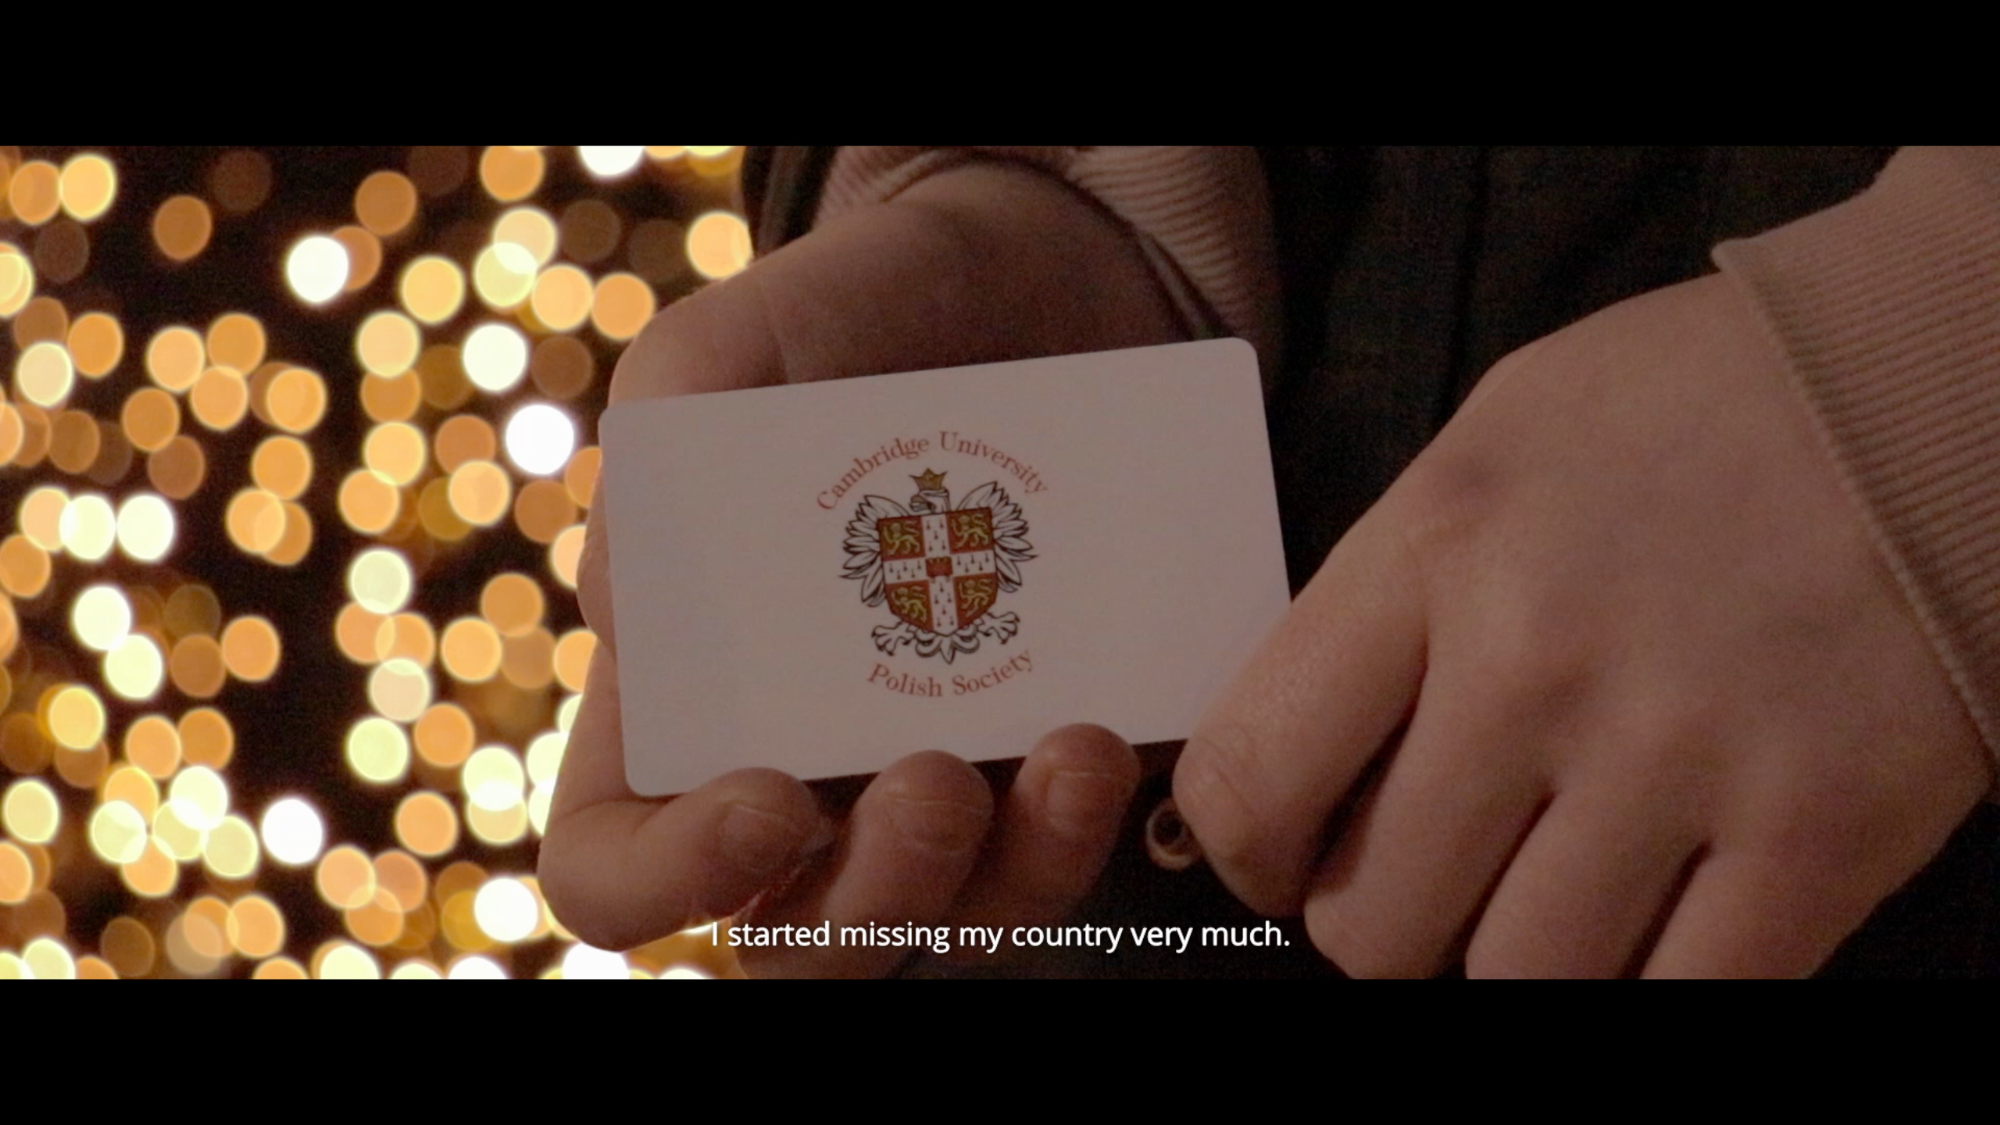 A screengrab from 'Finding Home', a documentary about the Polish community living in Cambridge